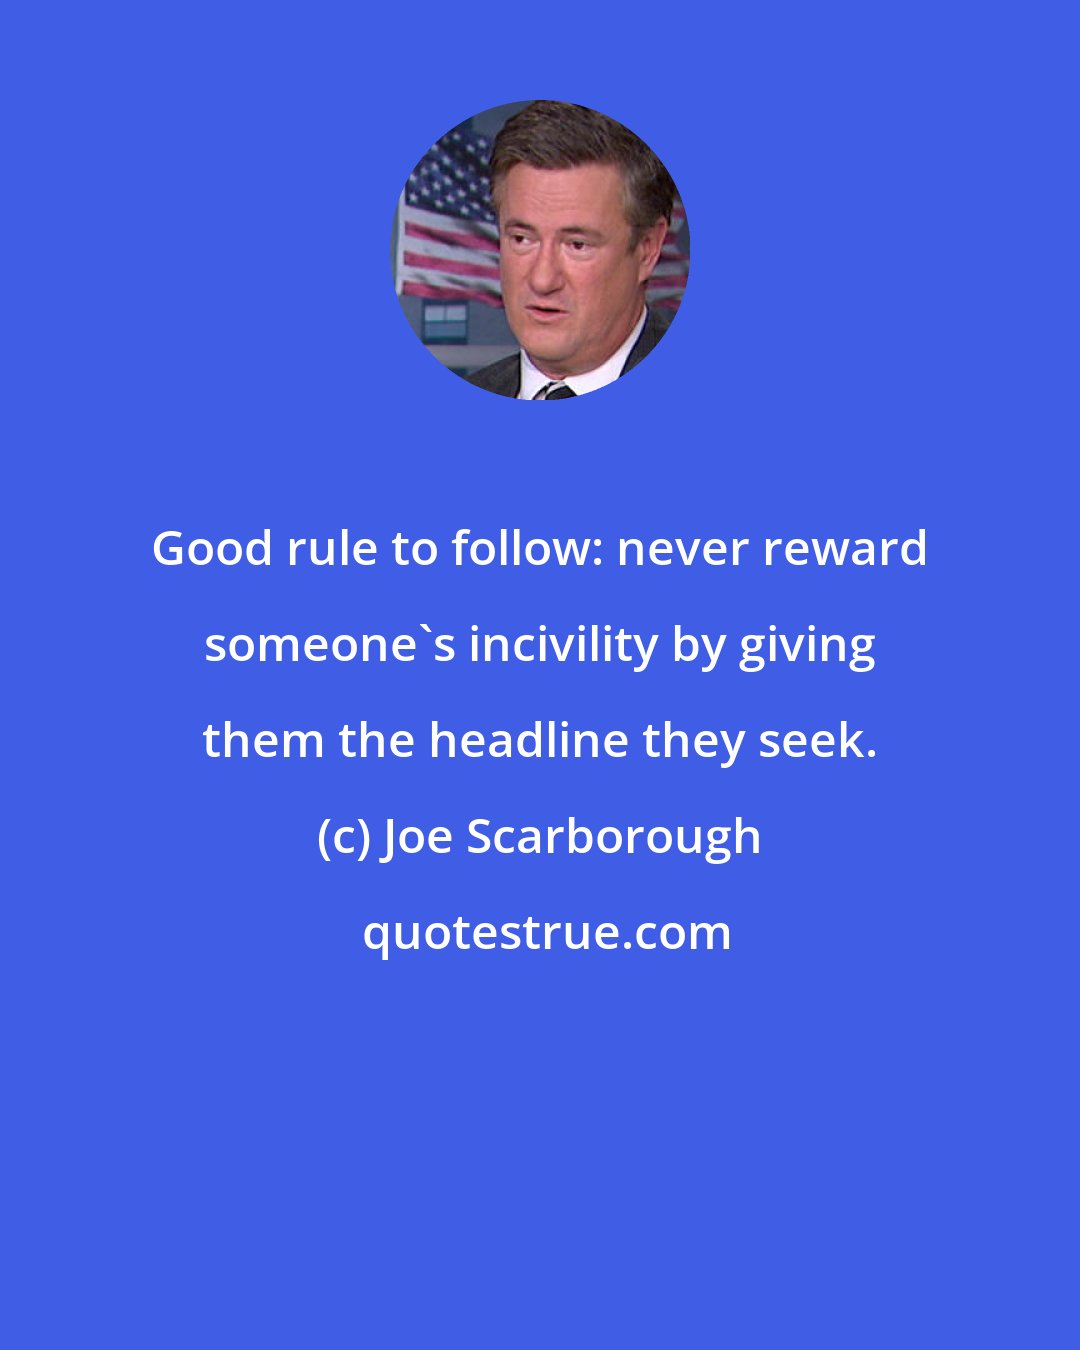 Joe Scarborough: Good rule to follow: never reward someone's incivility by giving them the headline they seek.